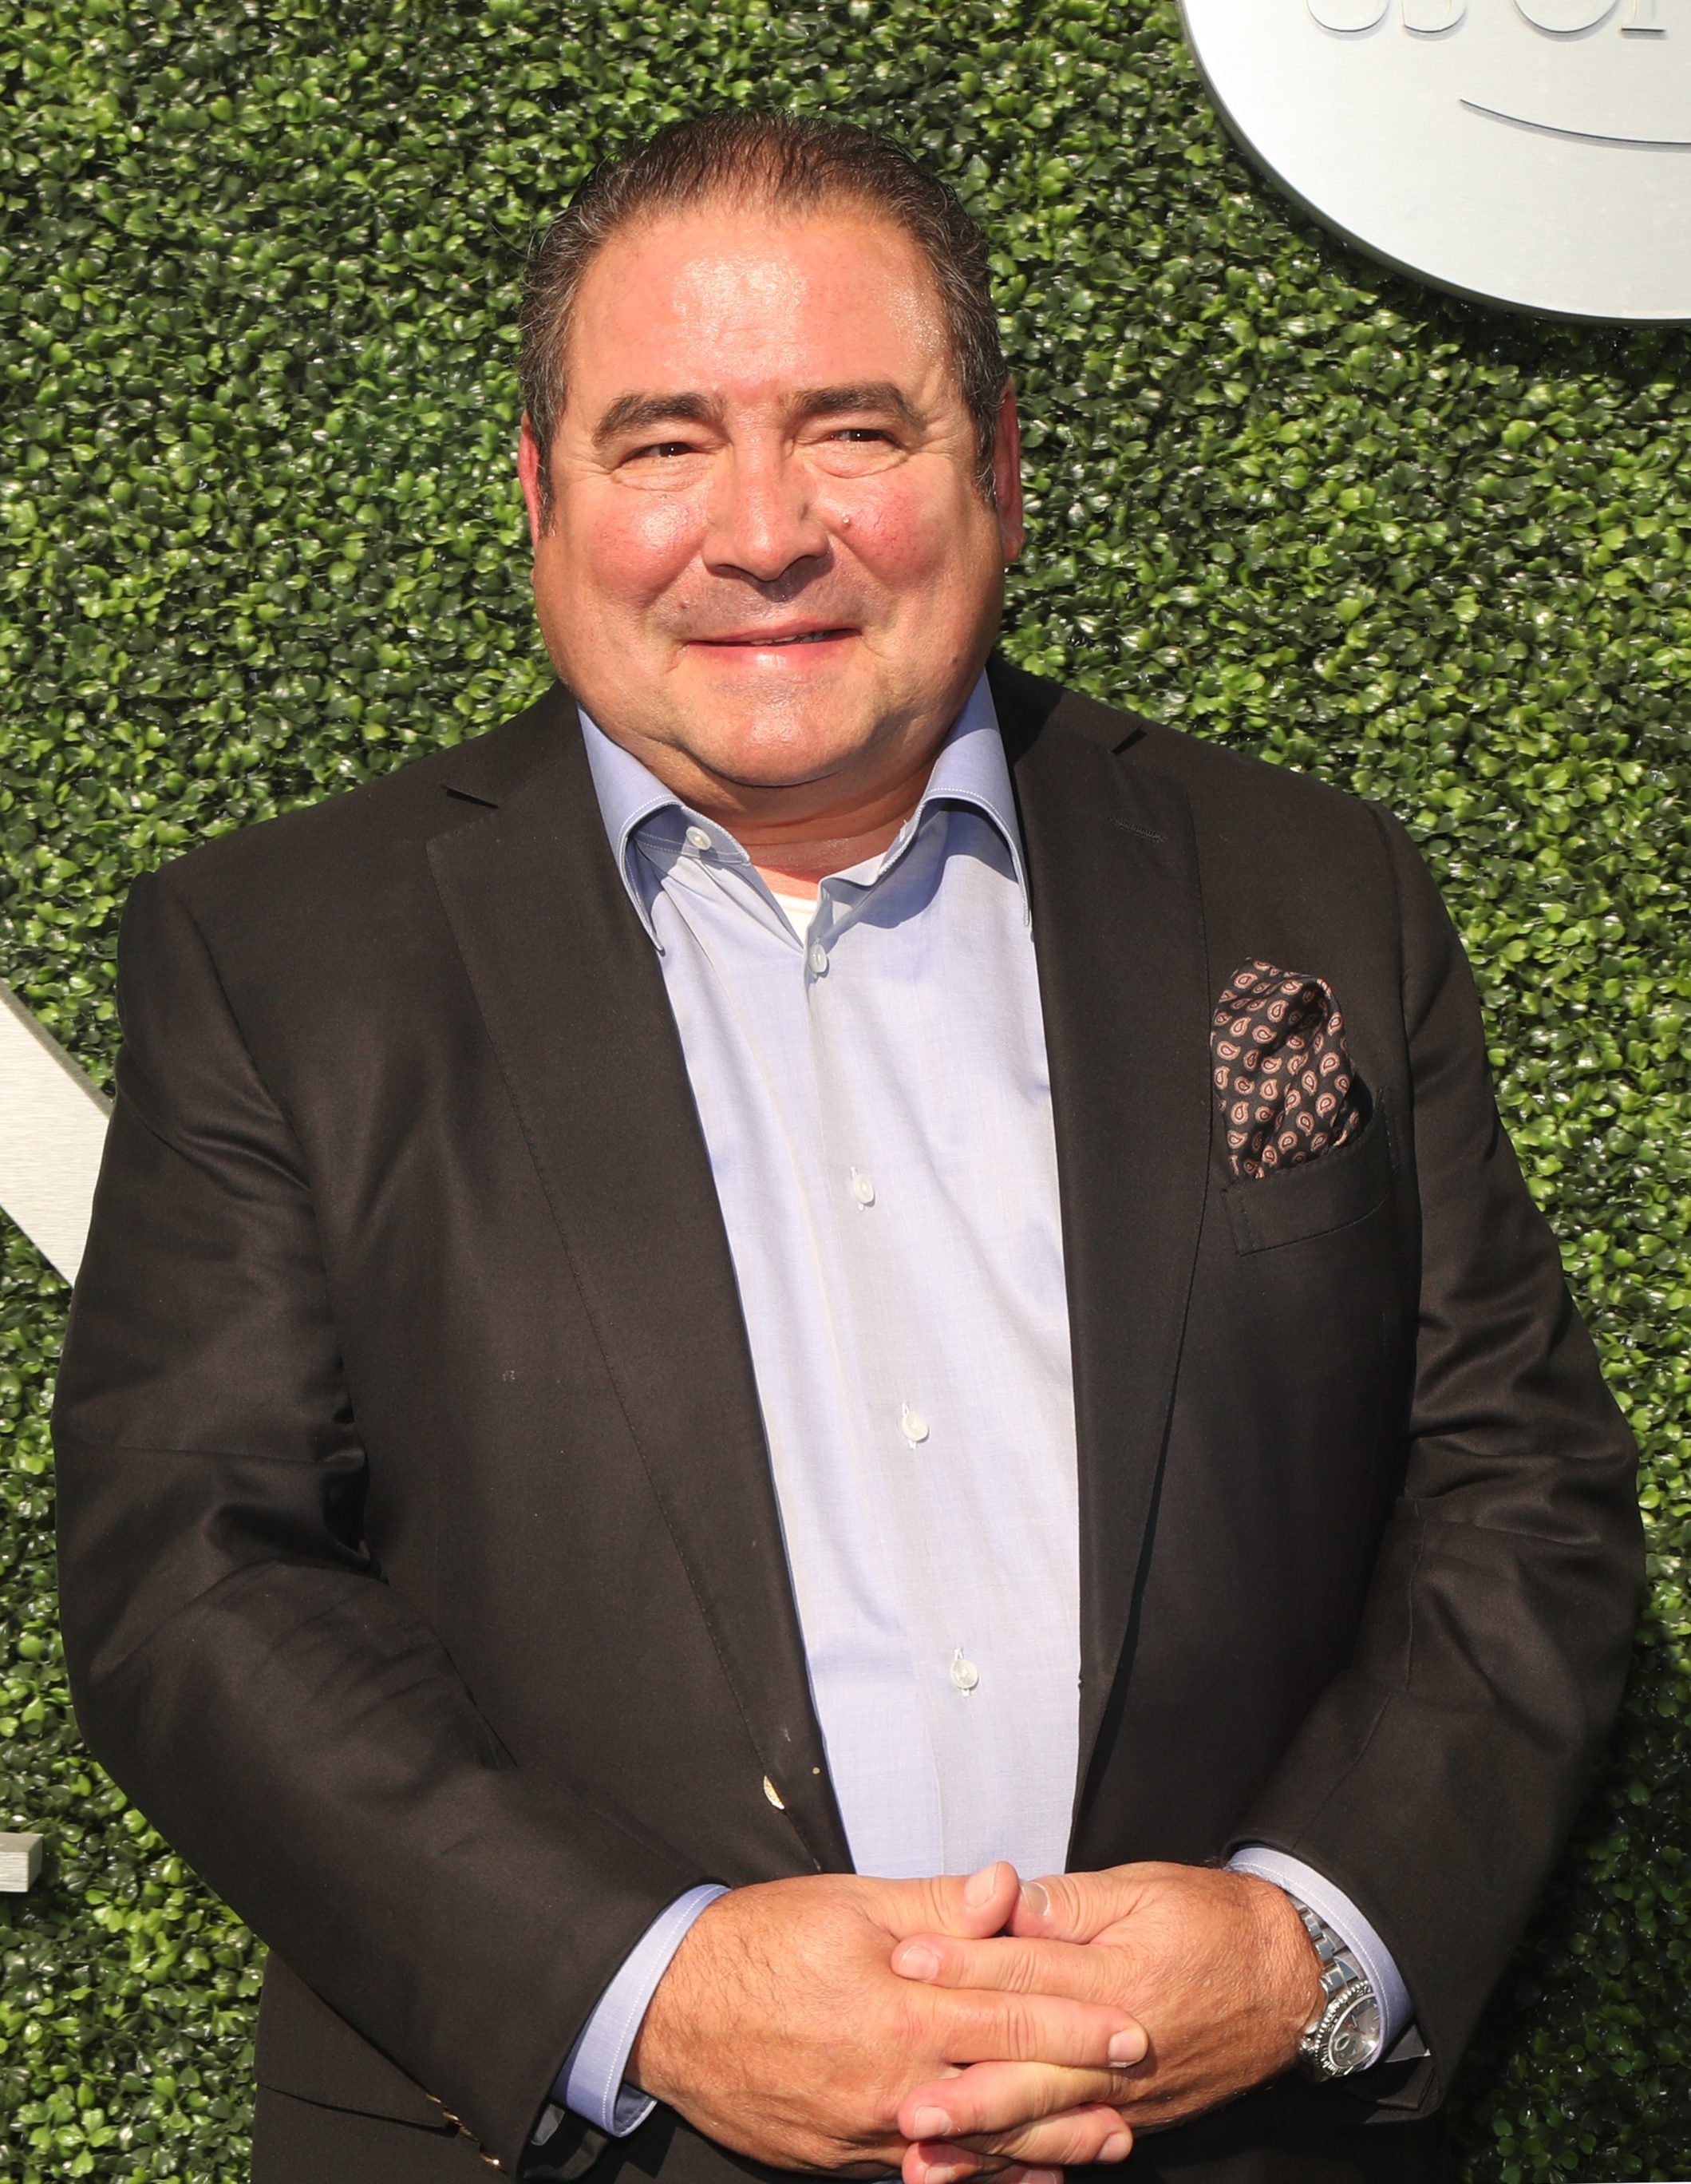  Emeril Lagasse - American Celebrity Chef of Top Richest Celebrity Chefs